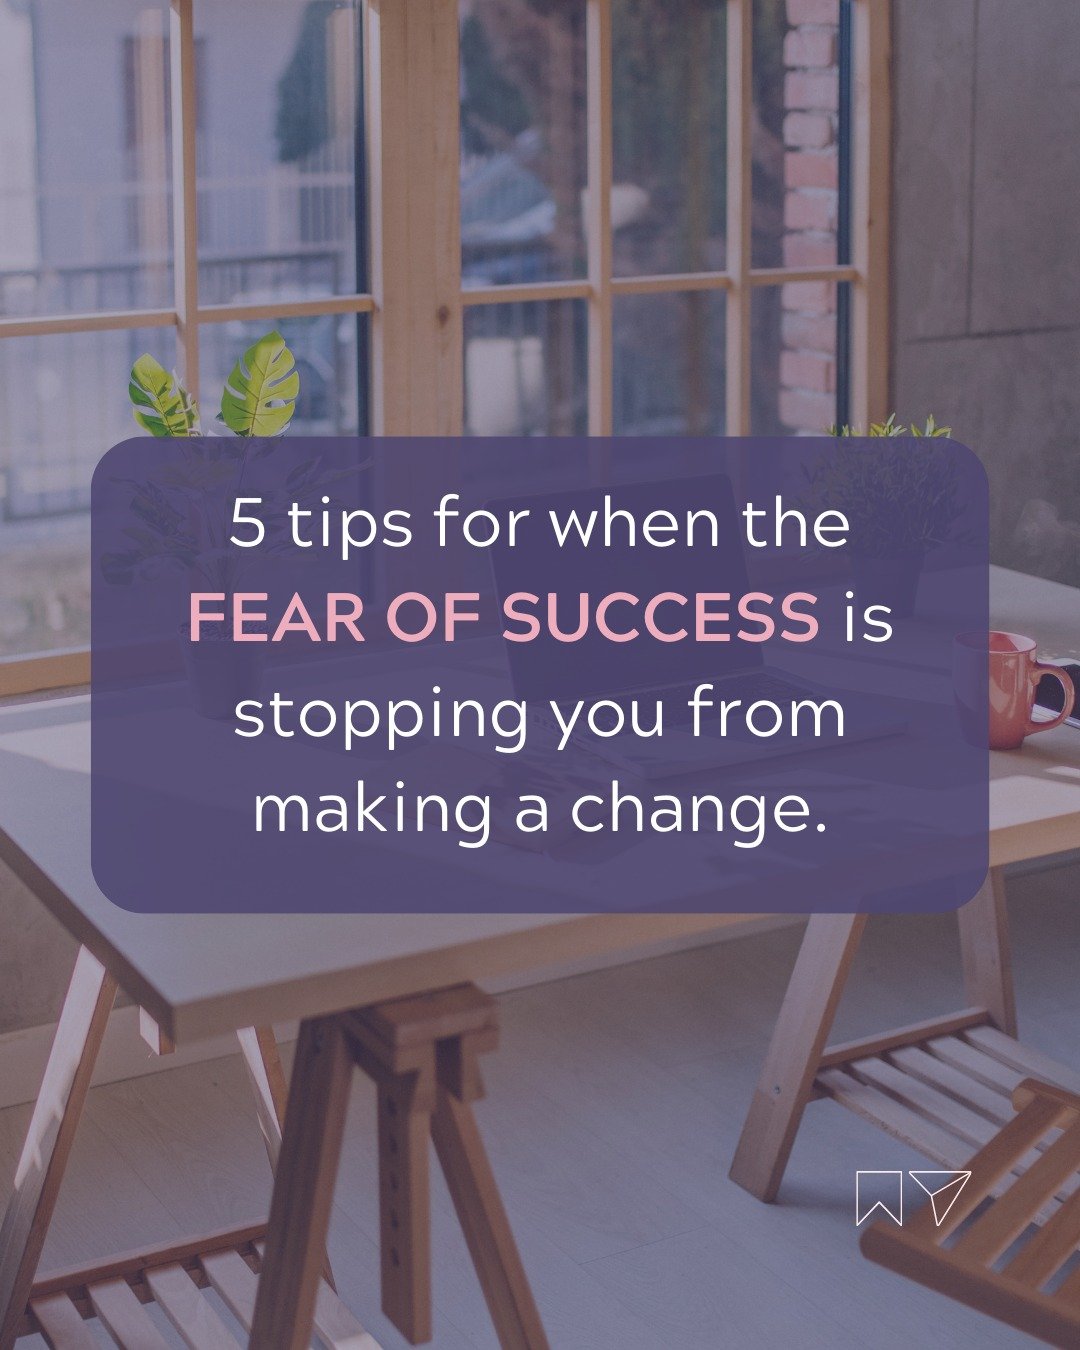 Whilst not talked about as much, the fear of success is a genuine issue that can stop us from taking action. You might be scared of what will happen if you're in the spotlight, or that you'll be incapable of sustaining the success or even of leaving 